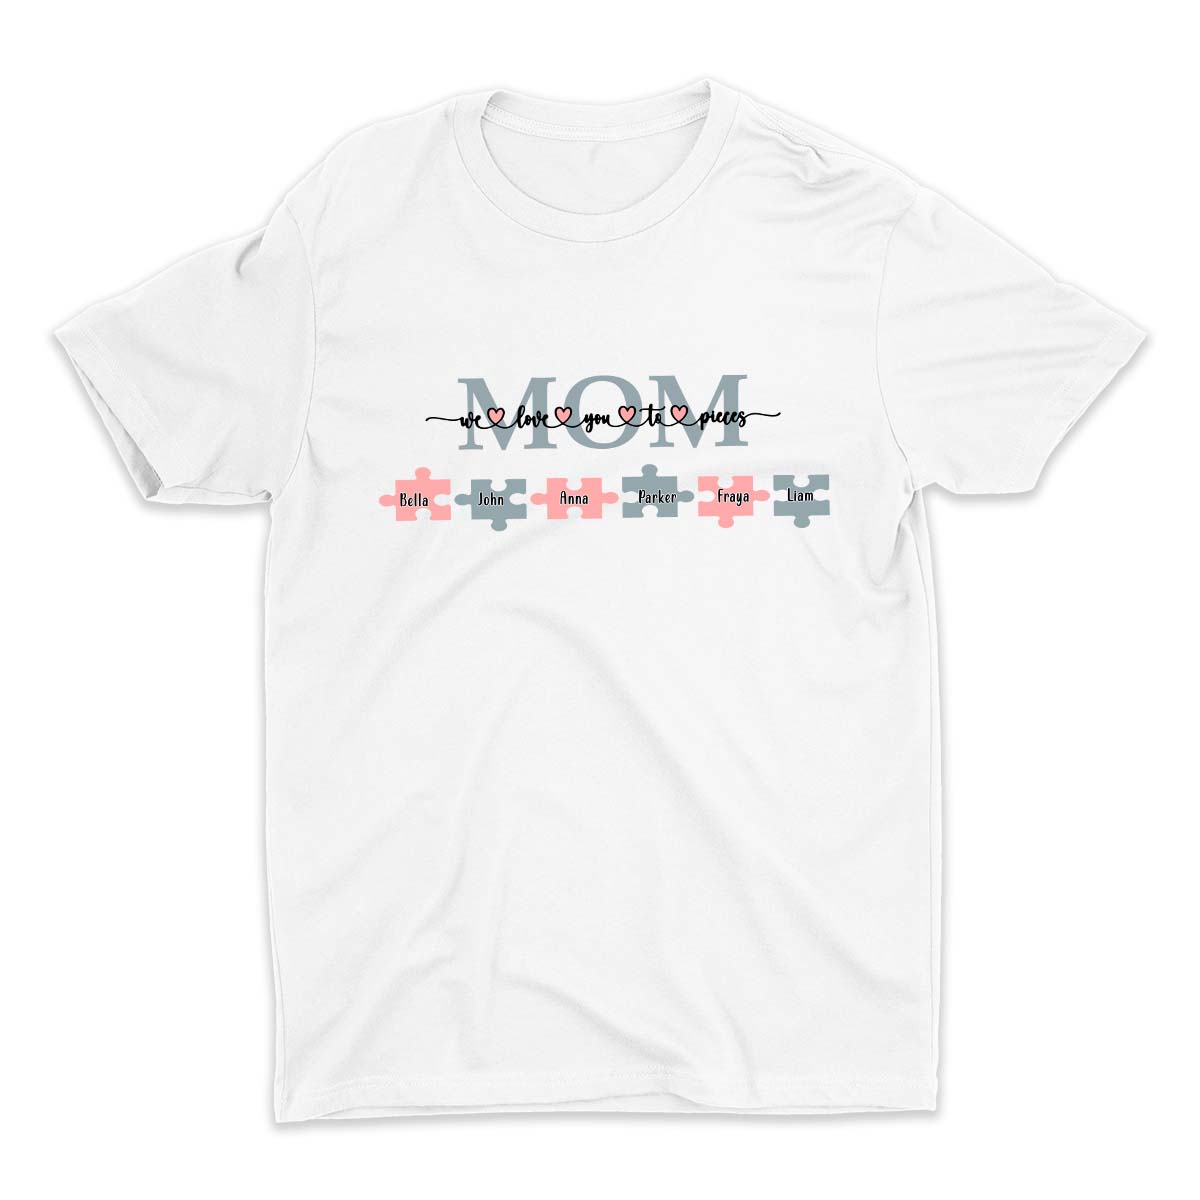 Mom We Love You to Pieces Shirt, Custom Mom Shirt, Custom Mom Sweatshirt, Cute Mama Shirts, Mom Life Shirt, Mama Shirt, Mom Shirt, Mother's Day Gift, Happy Mother’s Day